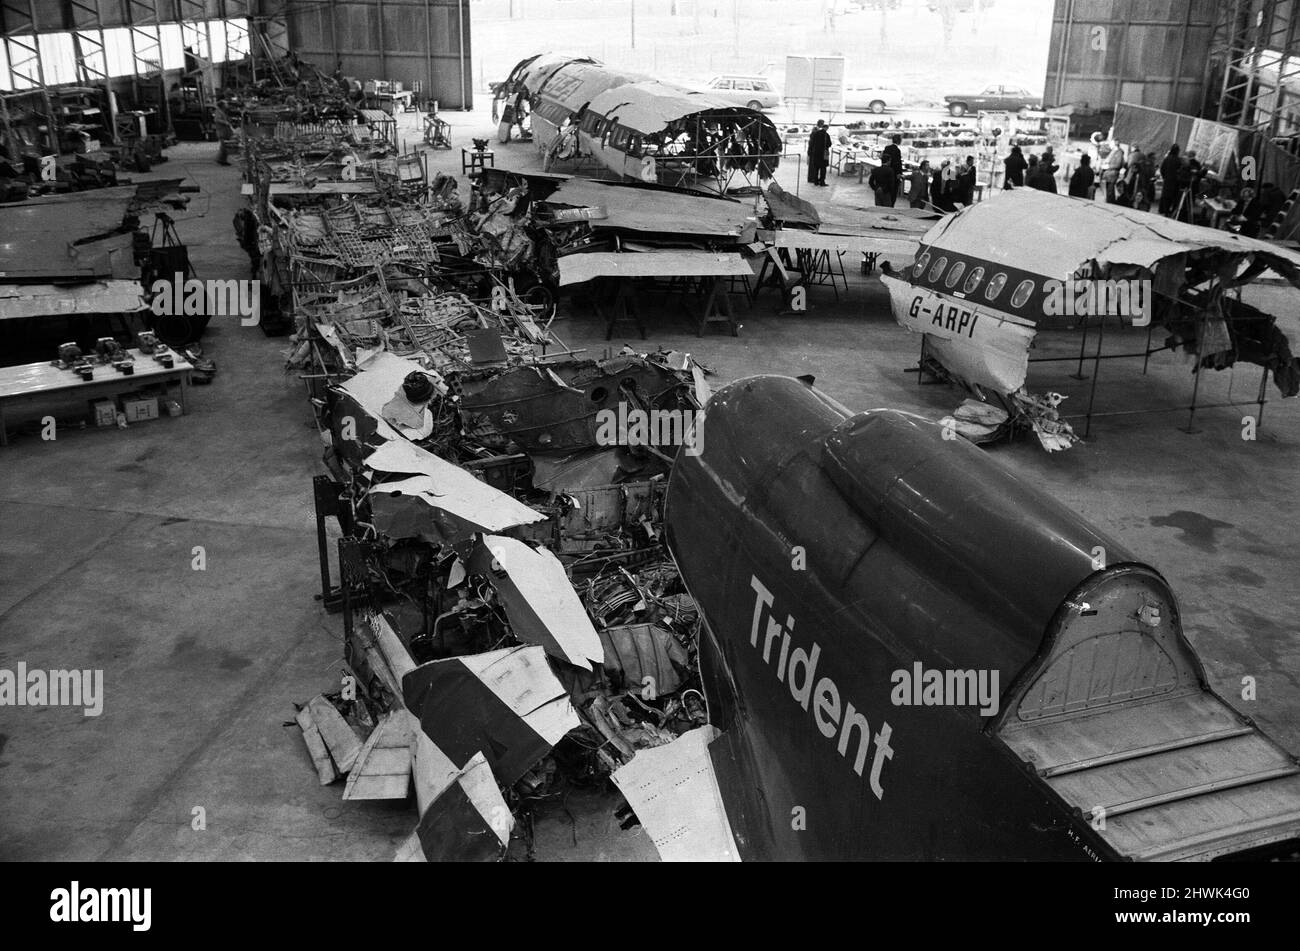 Inquiry into the Staines Air Disaster. The wreck of British European Airways Flight 548 which crashed near Staines, killing 118 people, has been reassembled in a hangar at RAE Farnborough, Hants. The Accident Investigation Branch of the Dept. of Trade and Industry conducted tests on the wreck, to assist the Court of Inquiry. 17th November 1972. Stock Photo